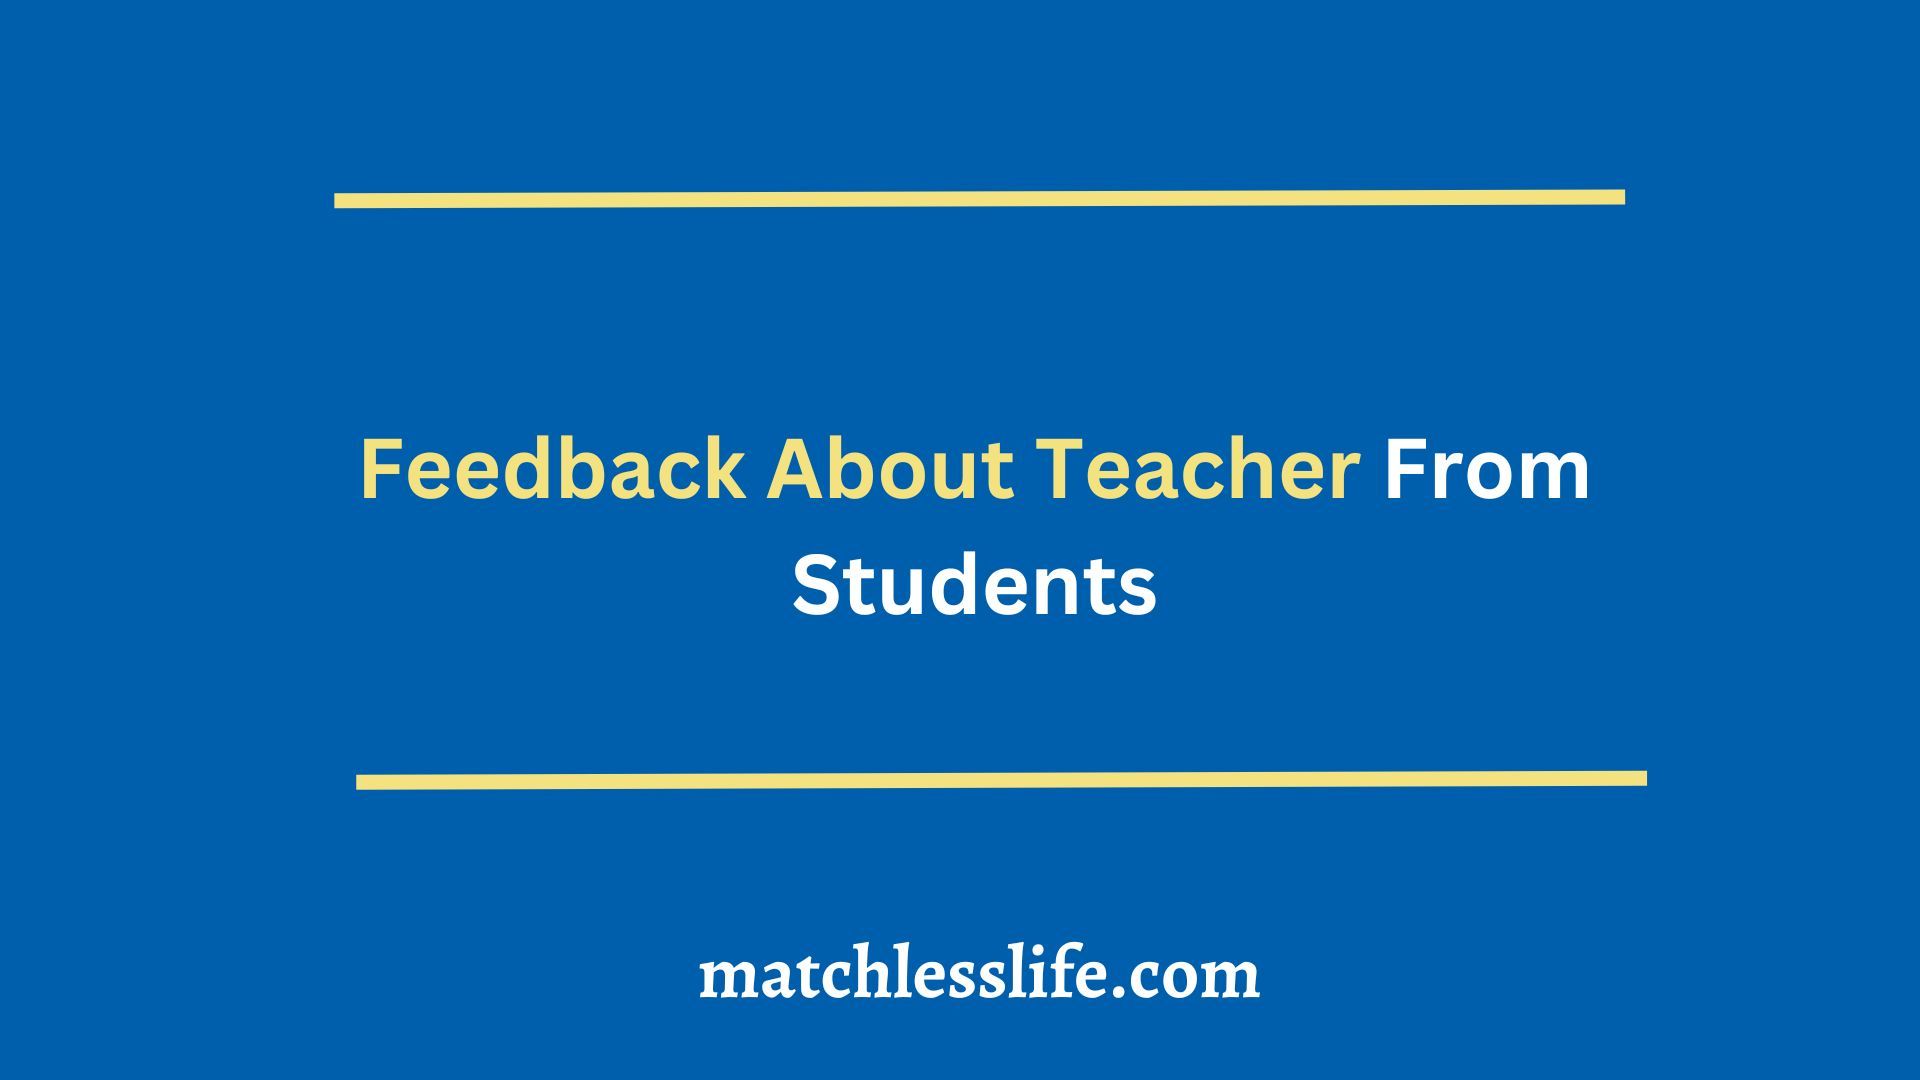 Feedback About Teacher From Students